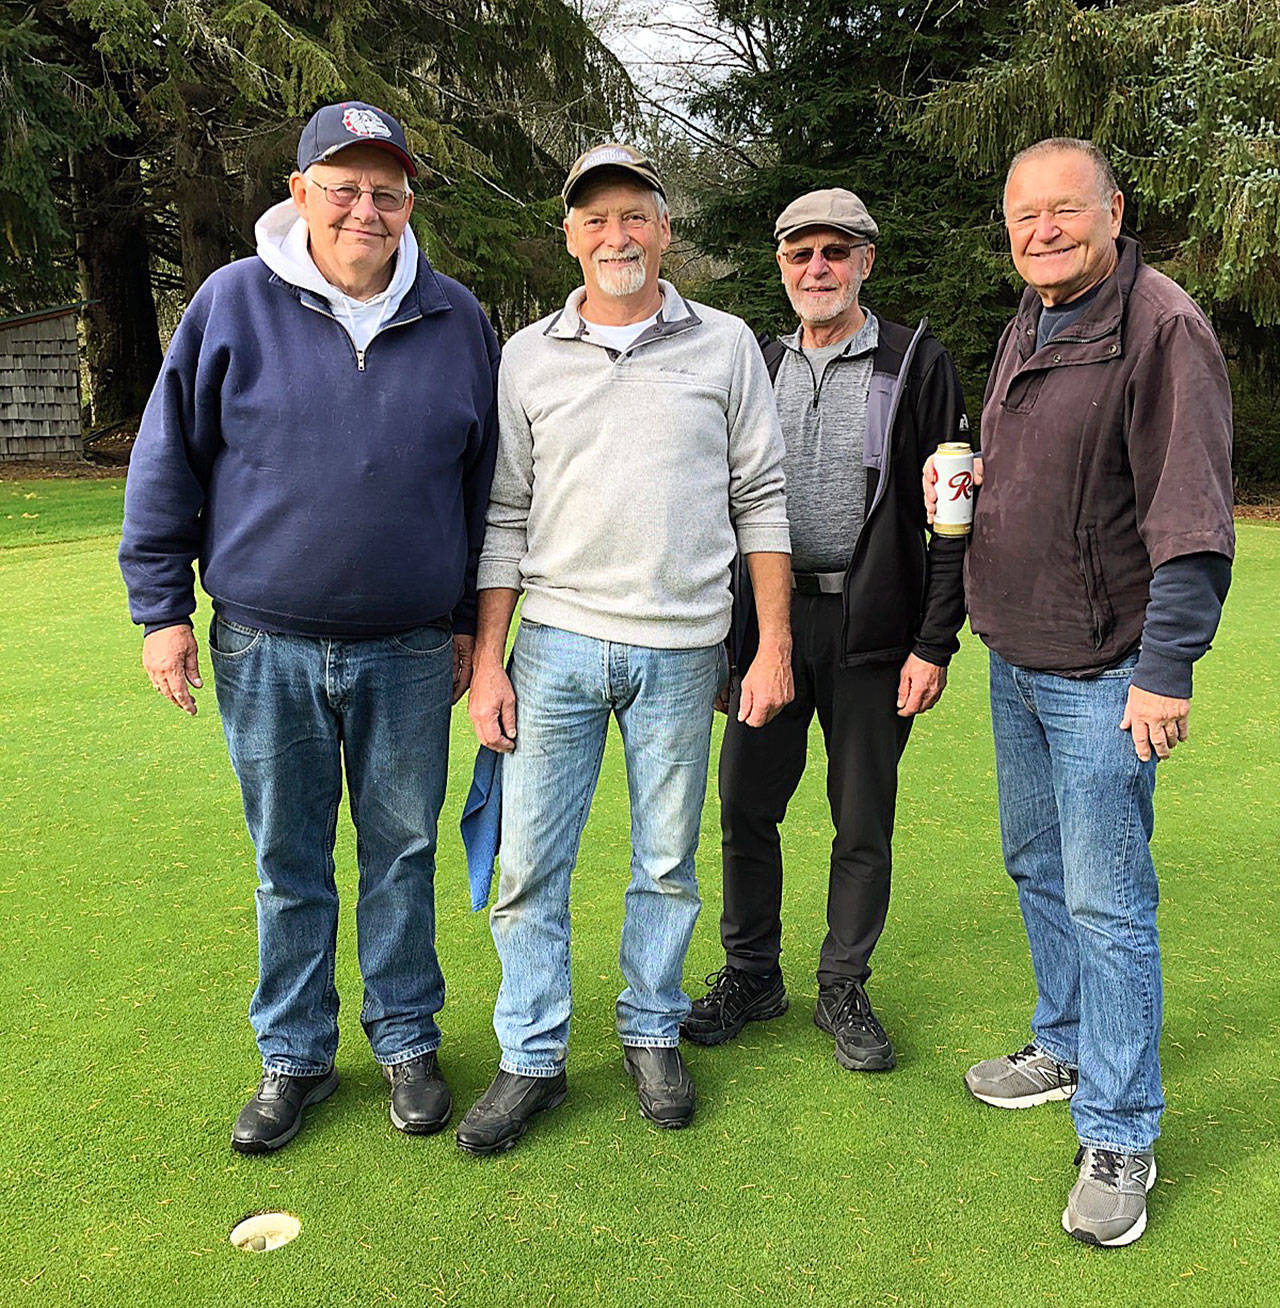 Bob Smith, second from left, is pictured with (from left) Doug King, Ed Coyle and Dave Scure after shooting an ace at Highland Golf Course on Tuesday. (Submitted photo)